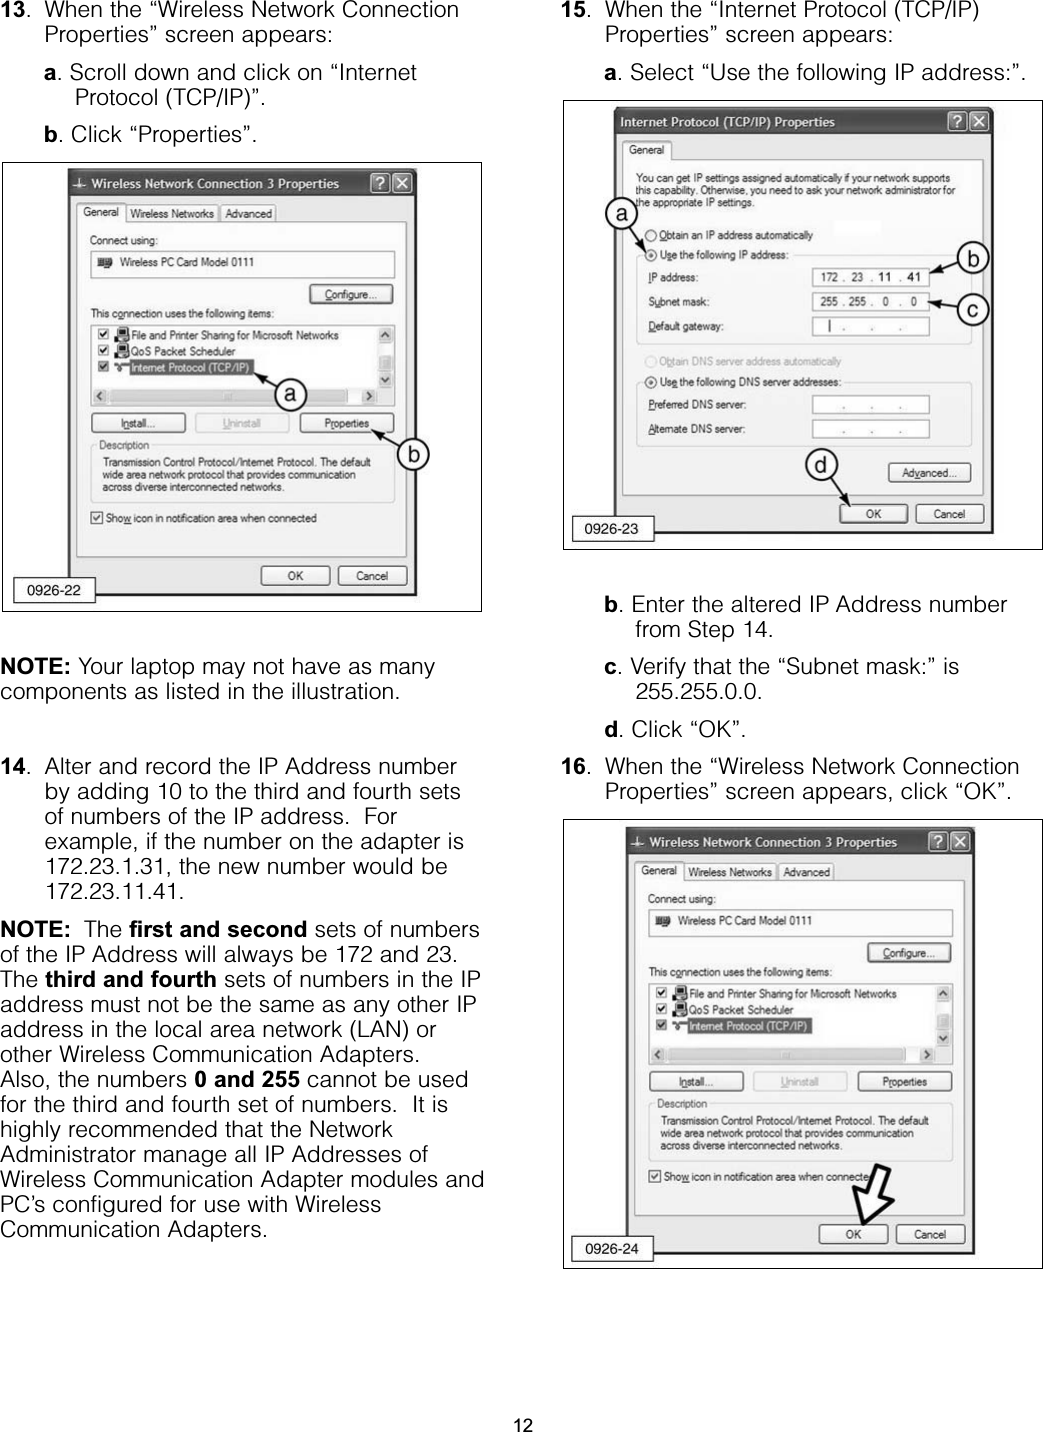 13. When the “Wireless Network ConnectionProperties” screen appears:a. Scroll down and click on “InternetProtocol (TCP/IP)”.b. Click “Properties”.NOTE: Your laptop may not have as manycomponents as listed in the illustration.14. Alter and record the IP Address numberby adding 10 to the third and fourth setsof numbers of the IP address.  Forexample, if the number on the adapter is172.23.1.31, the new number would be172.23.11.41.NOTE: The first and second sets of numbersof the IP Address will always be 172 and 23.The third and fourth sets of numbers in the IPaddress must not be the same as any other IPaddress in the local area network (LAN) orother Wireless Communication Adapters.Also, the numbers 0 and 255 cannot be usedfor the third and fourth set of numbers.  It ishighly recommended that the NetworkAdministrator manage all IP Addresses ofWireless Communication Adapter modules andPC’s configured for use with WirelessCommunication Adapters. 15. When the “Internet Protocol (TCP/IP)Properties” screen appears:a. Select “Use the following IP address:”.b. Enter the altered IP Address numberfrom Step 14.c. Verify that the “Subnet mask:” is255.255.0.0.d. Click “OK”.16. When the “Wireless Network ConnectionProperties” screen appears, click “OK”.12